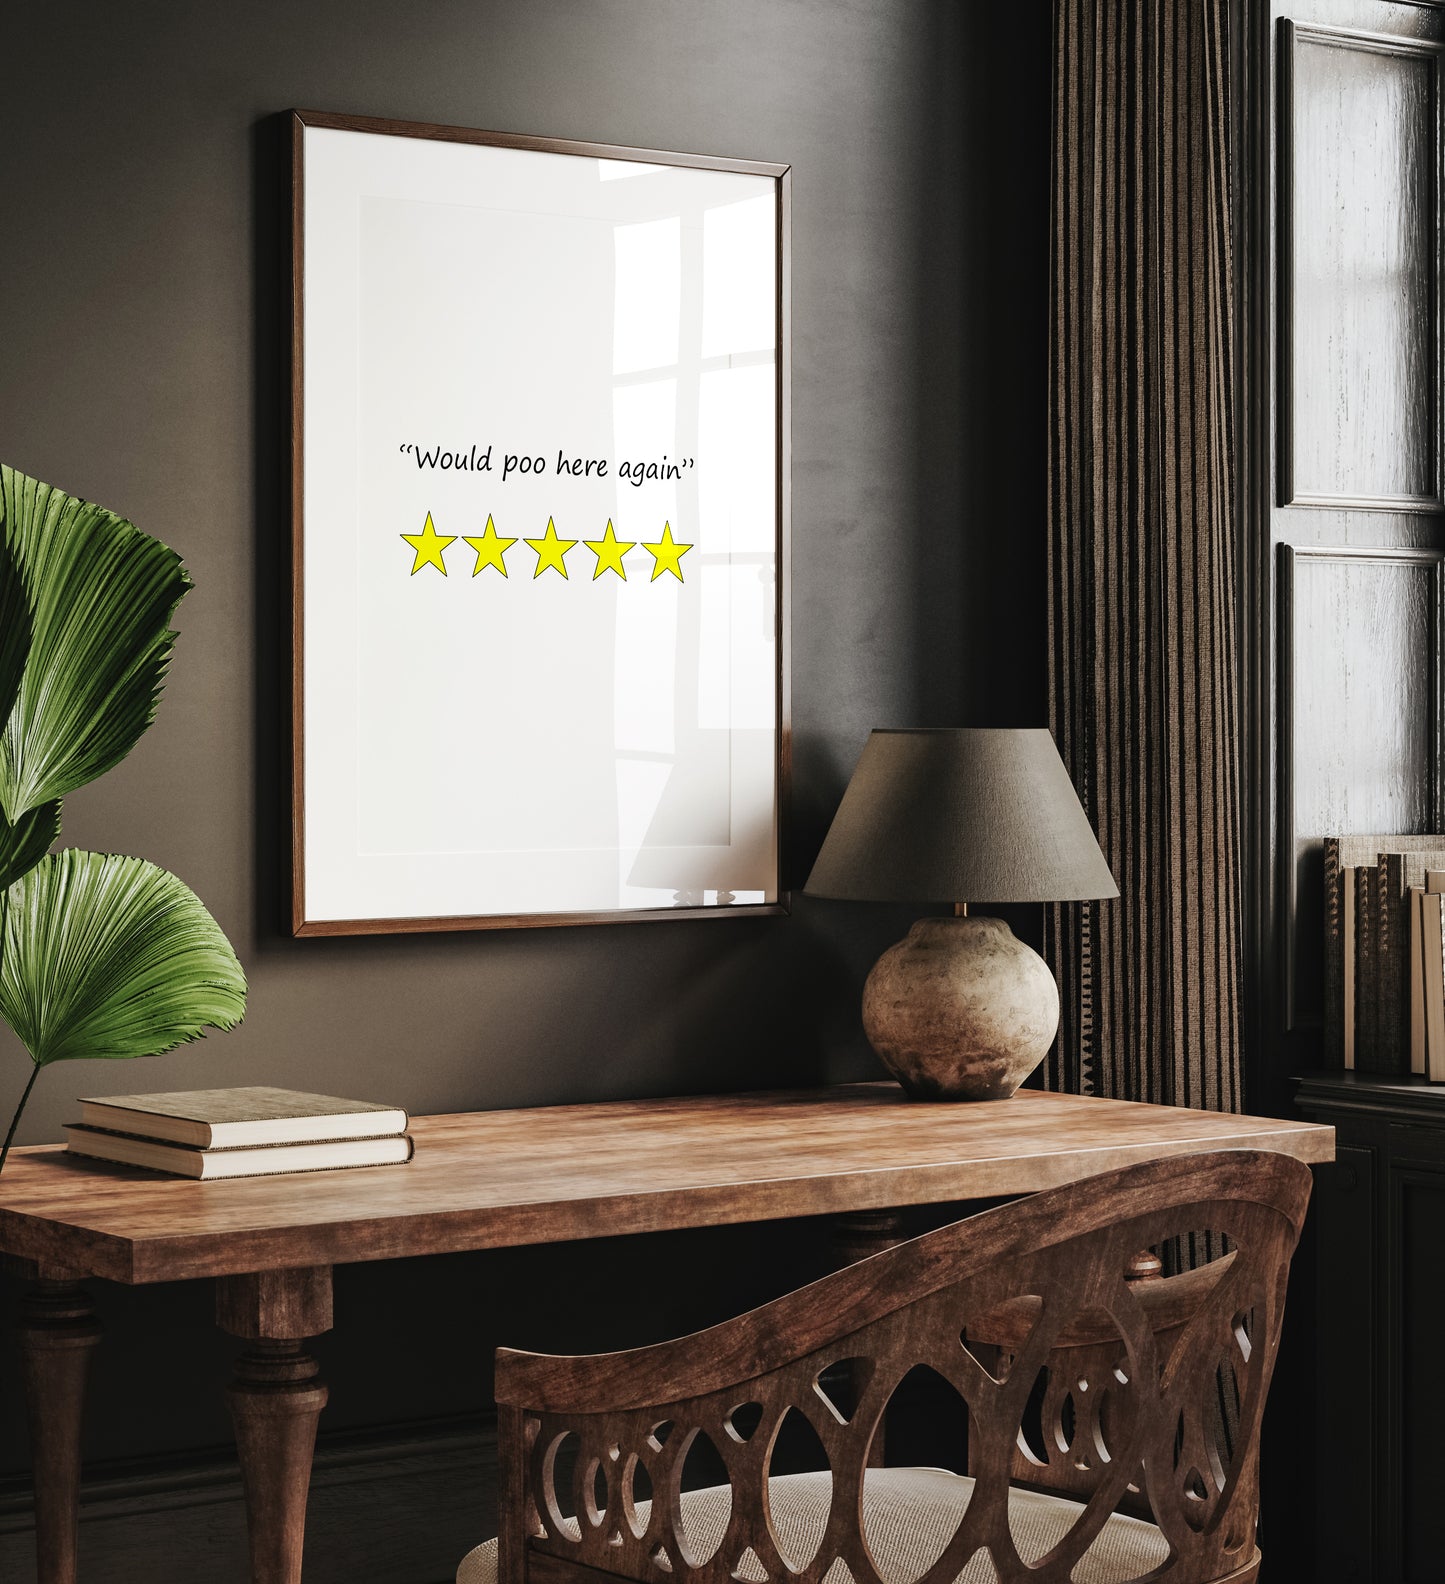 Would Poo Here Again 5 Stars Funny Toilet Review Print - Magic Posters